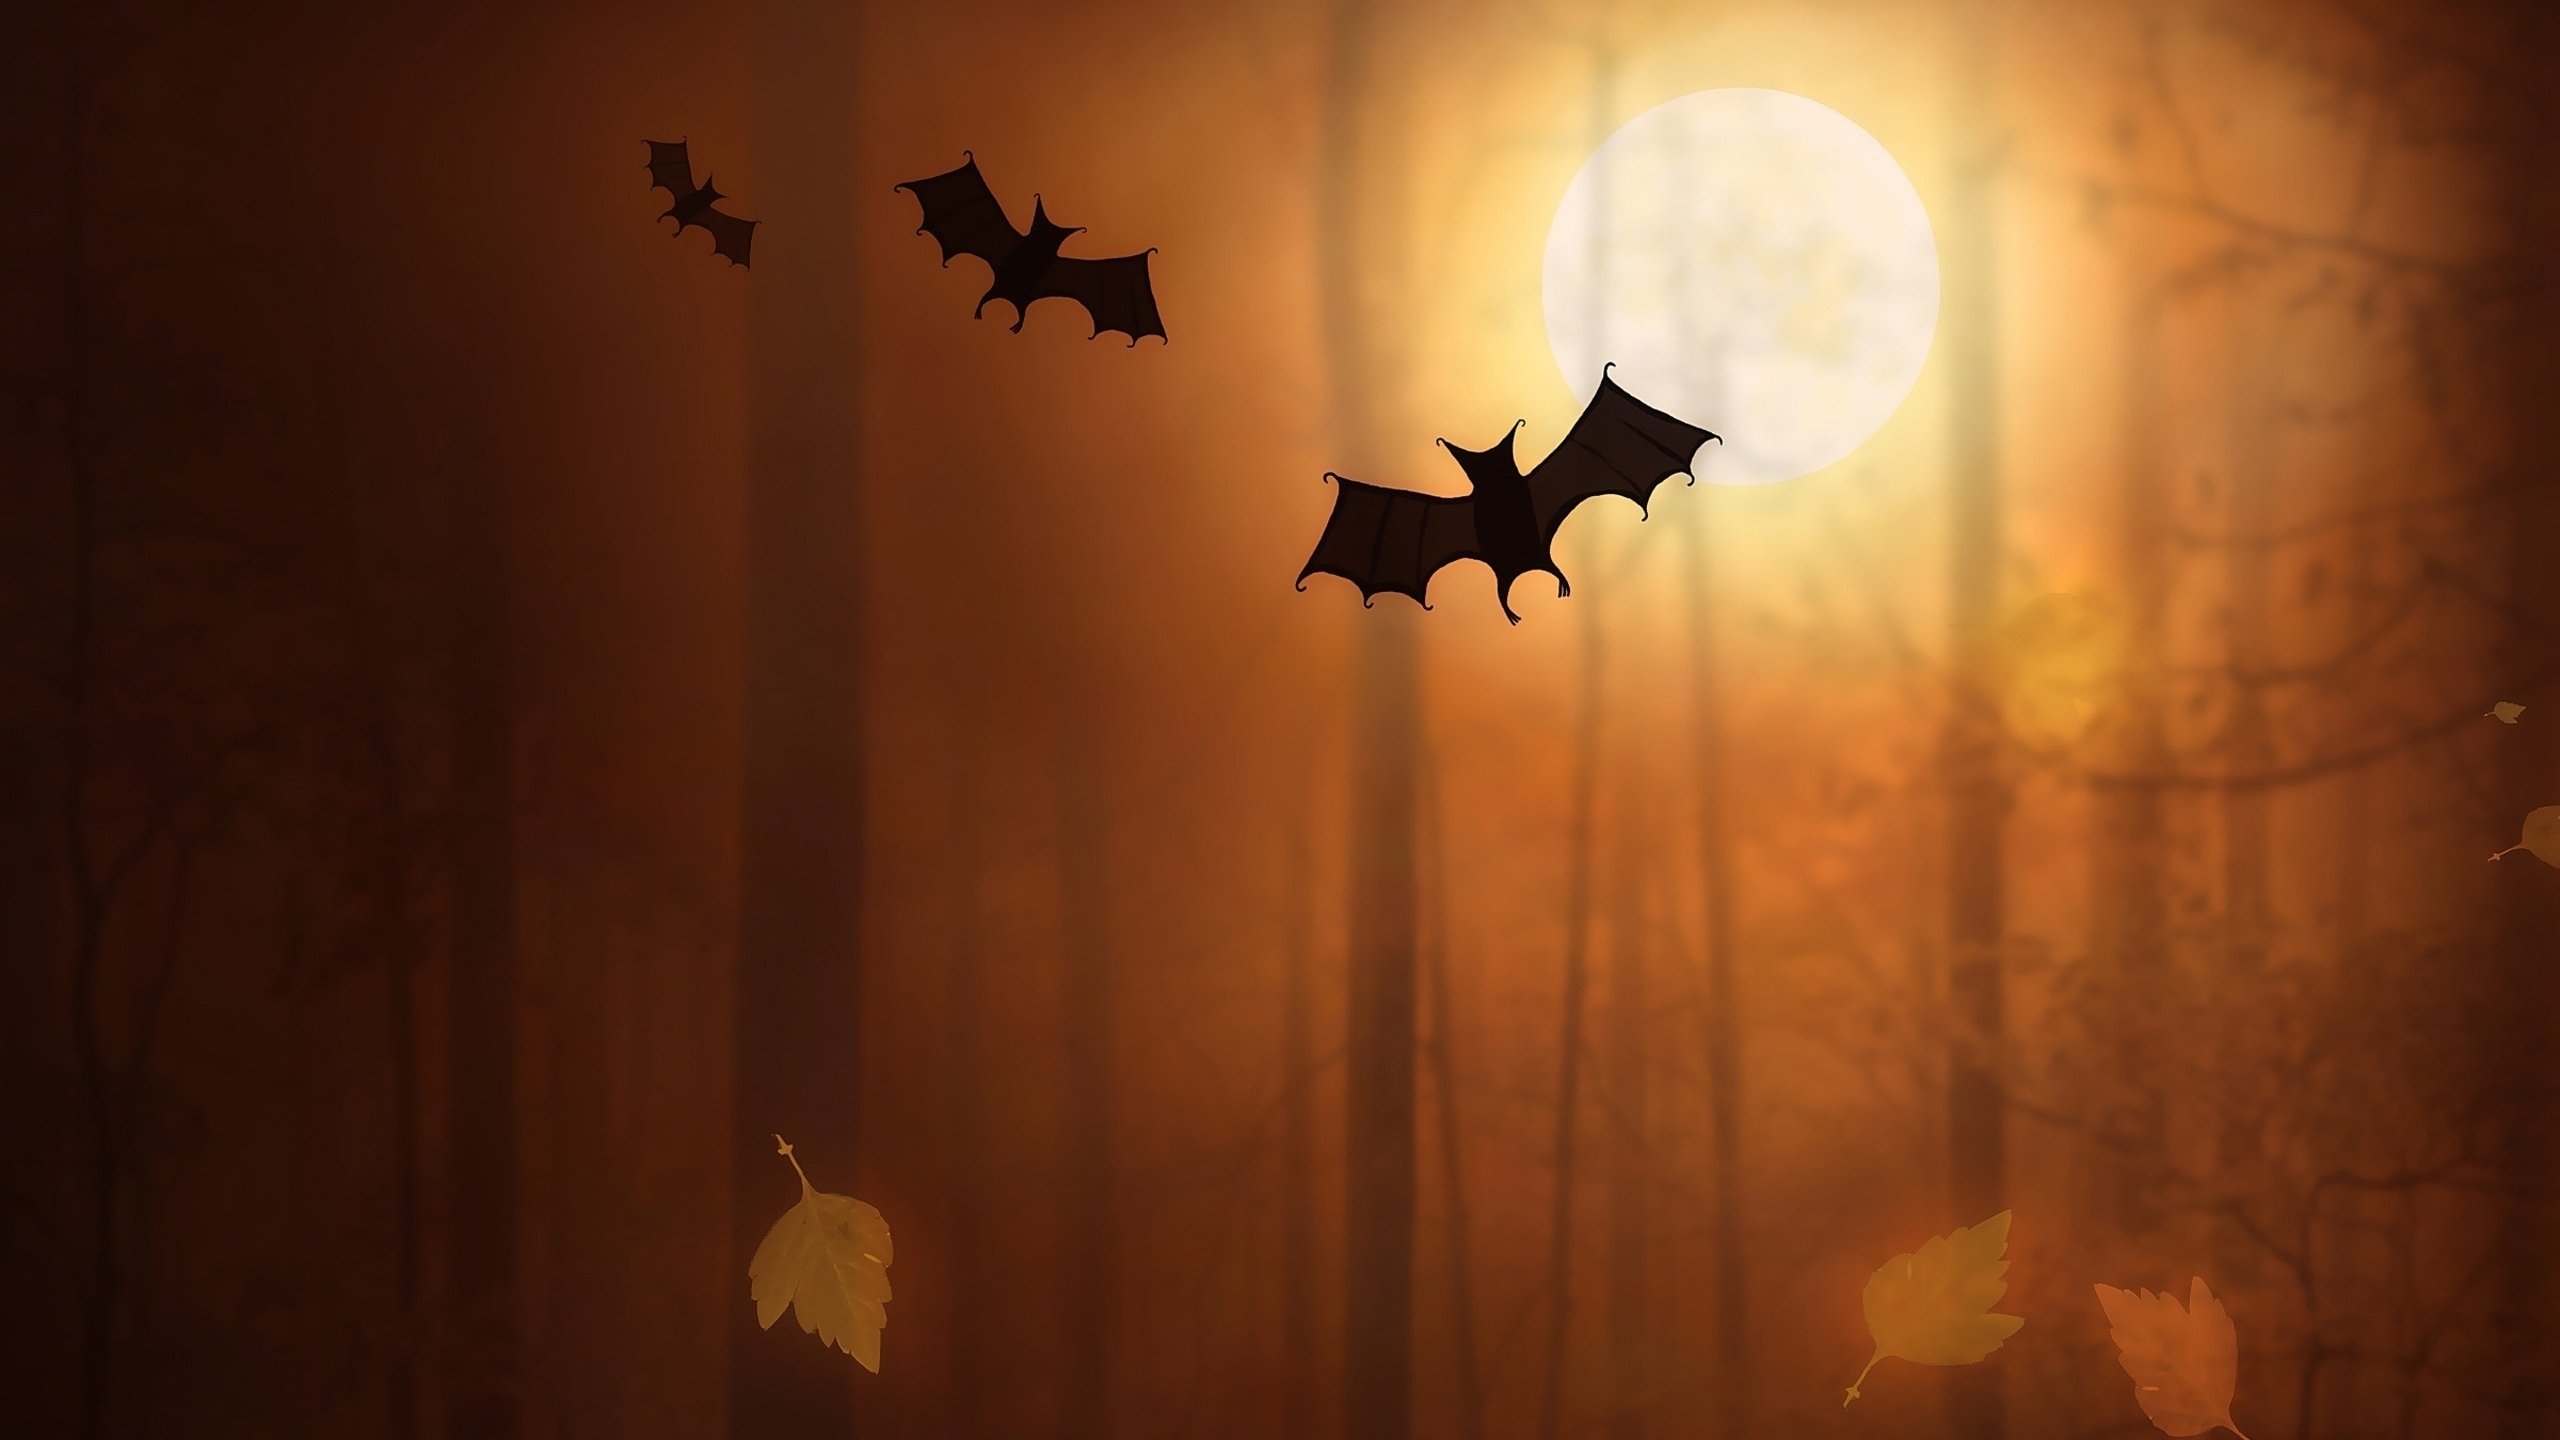 Bats in the foggy forest